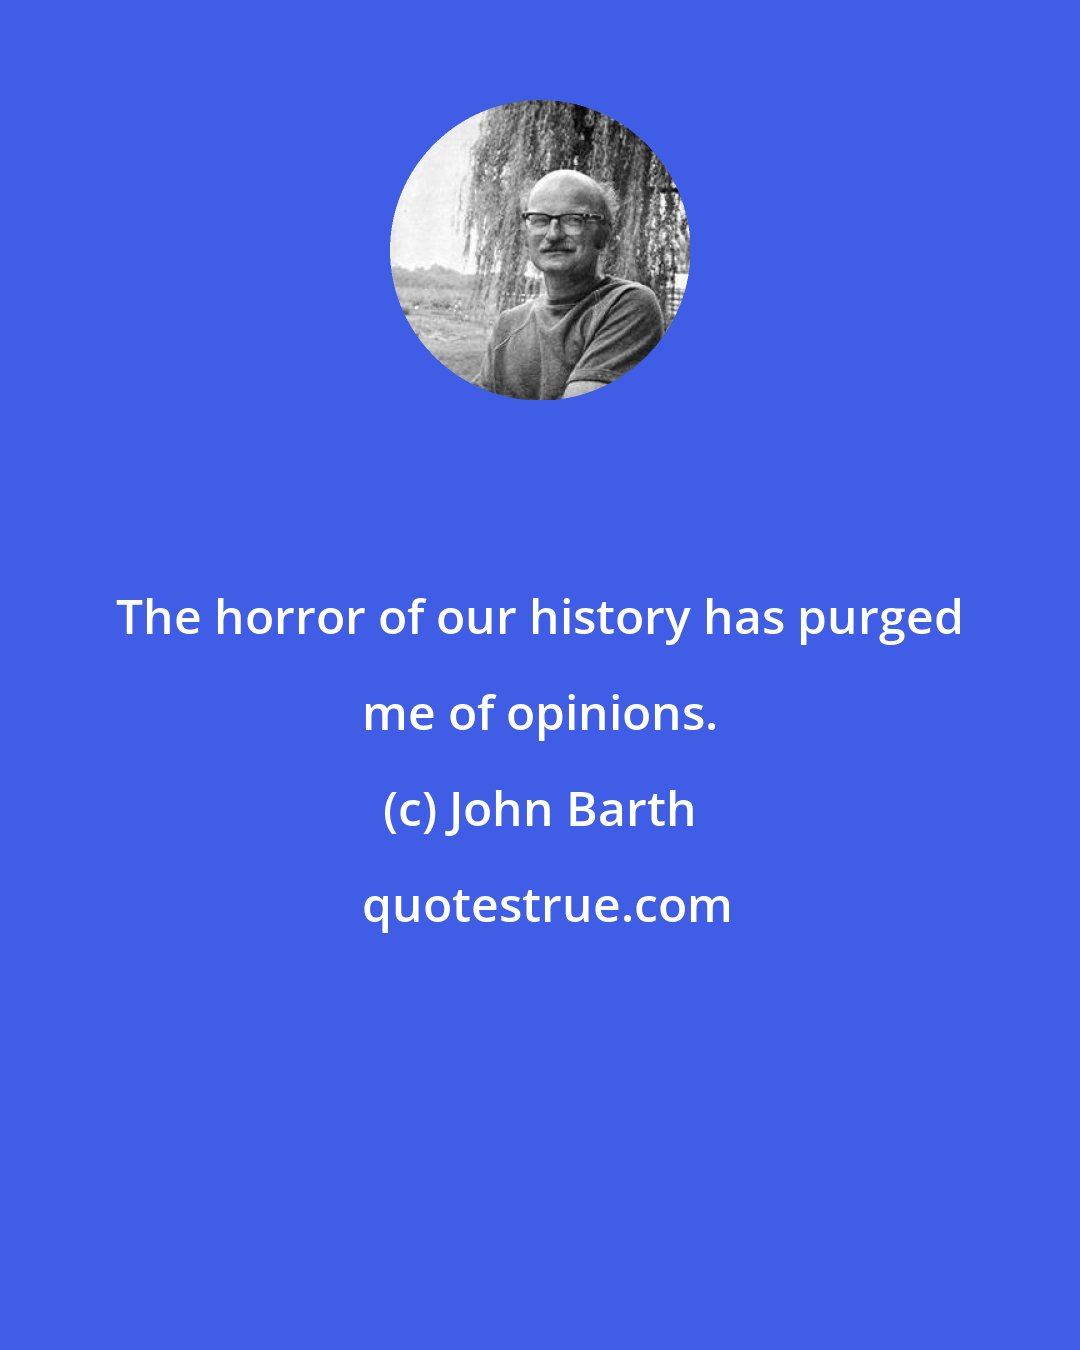 John Barth: The horror of our history has purged me of opinions.